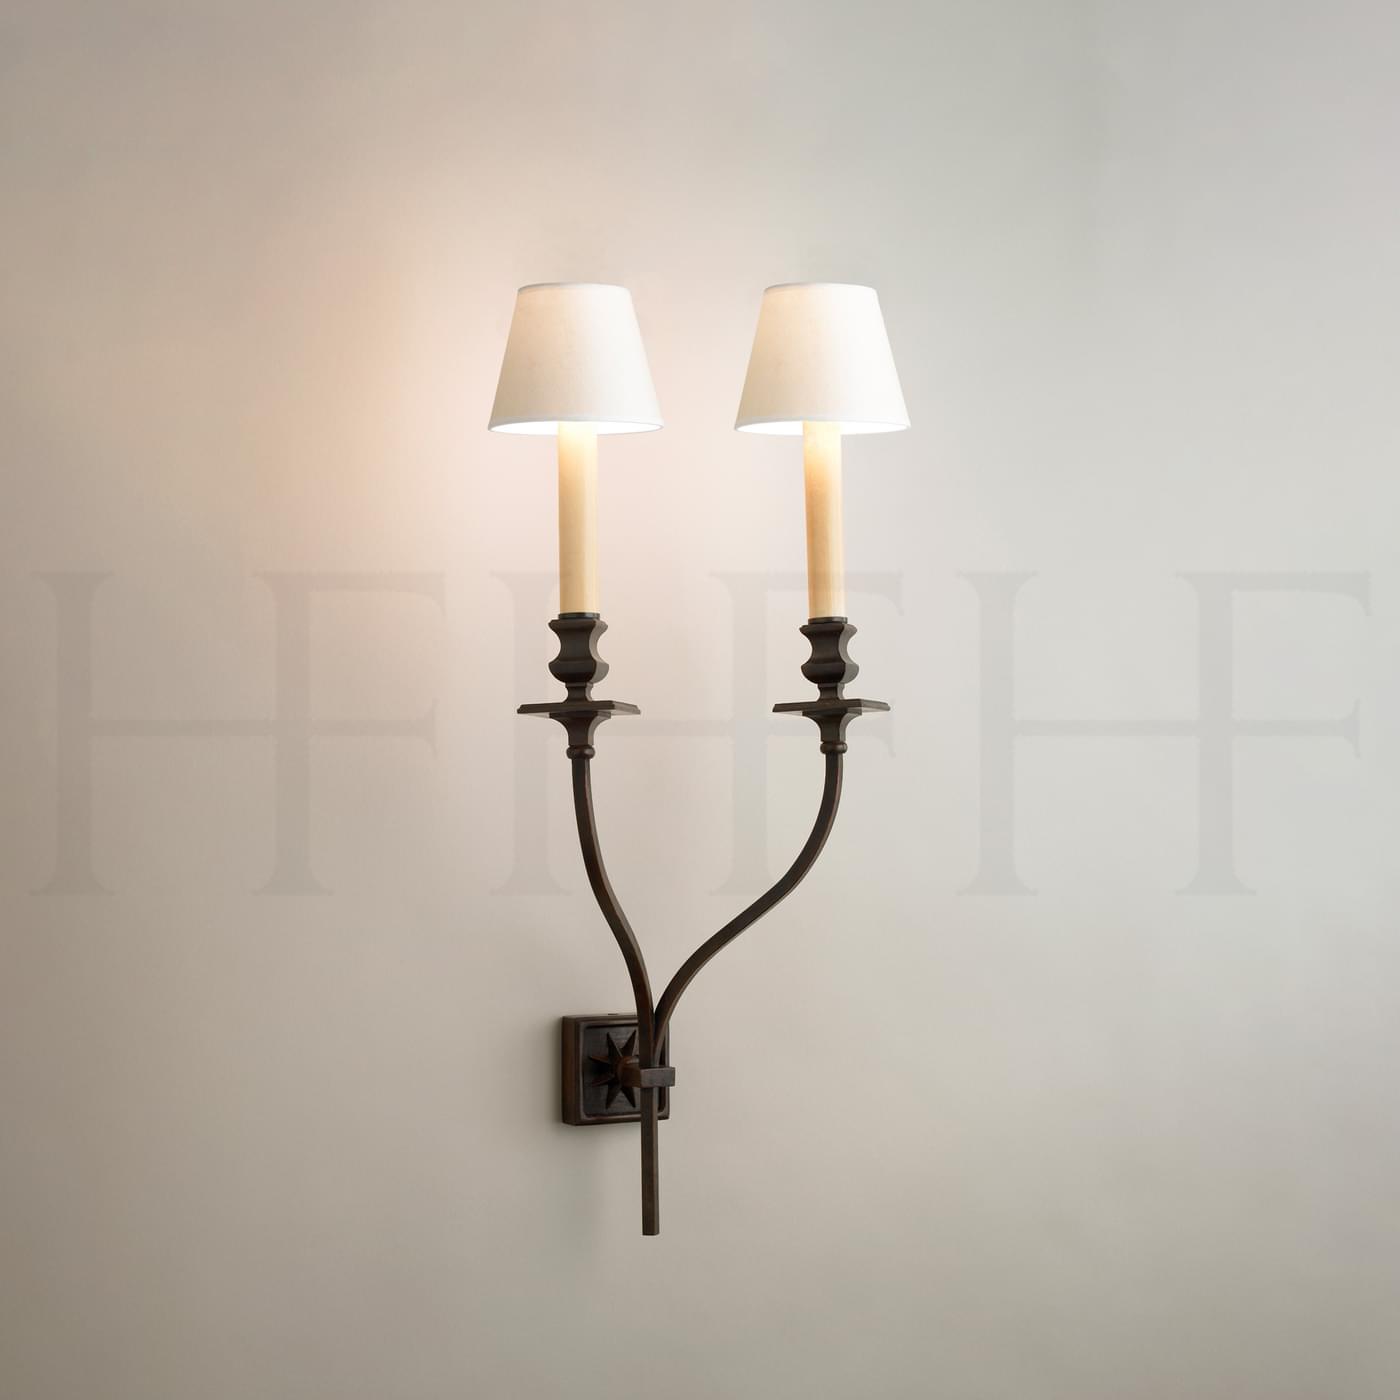 WL59 S Starback Wall Light Double Arm Small L